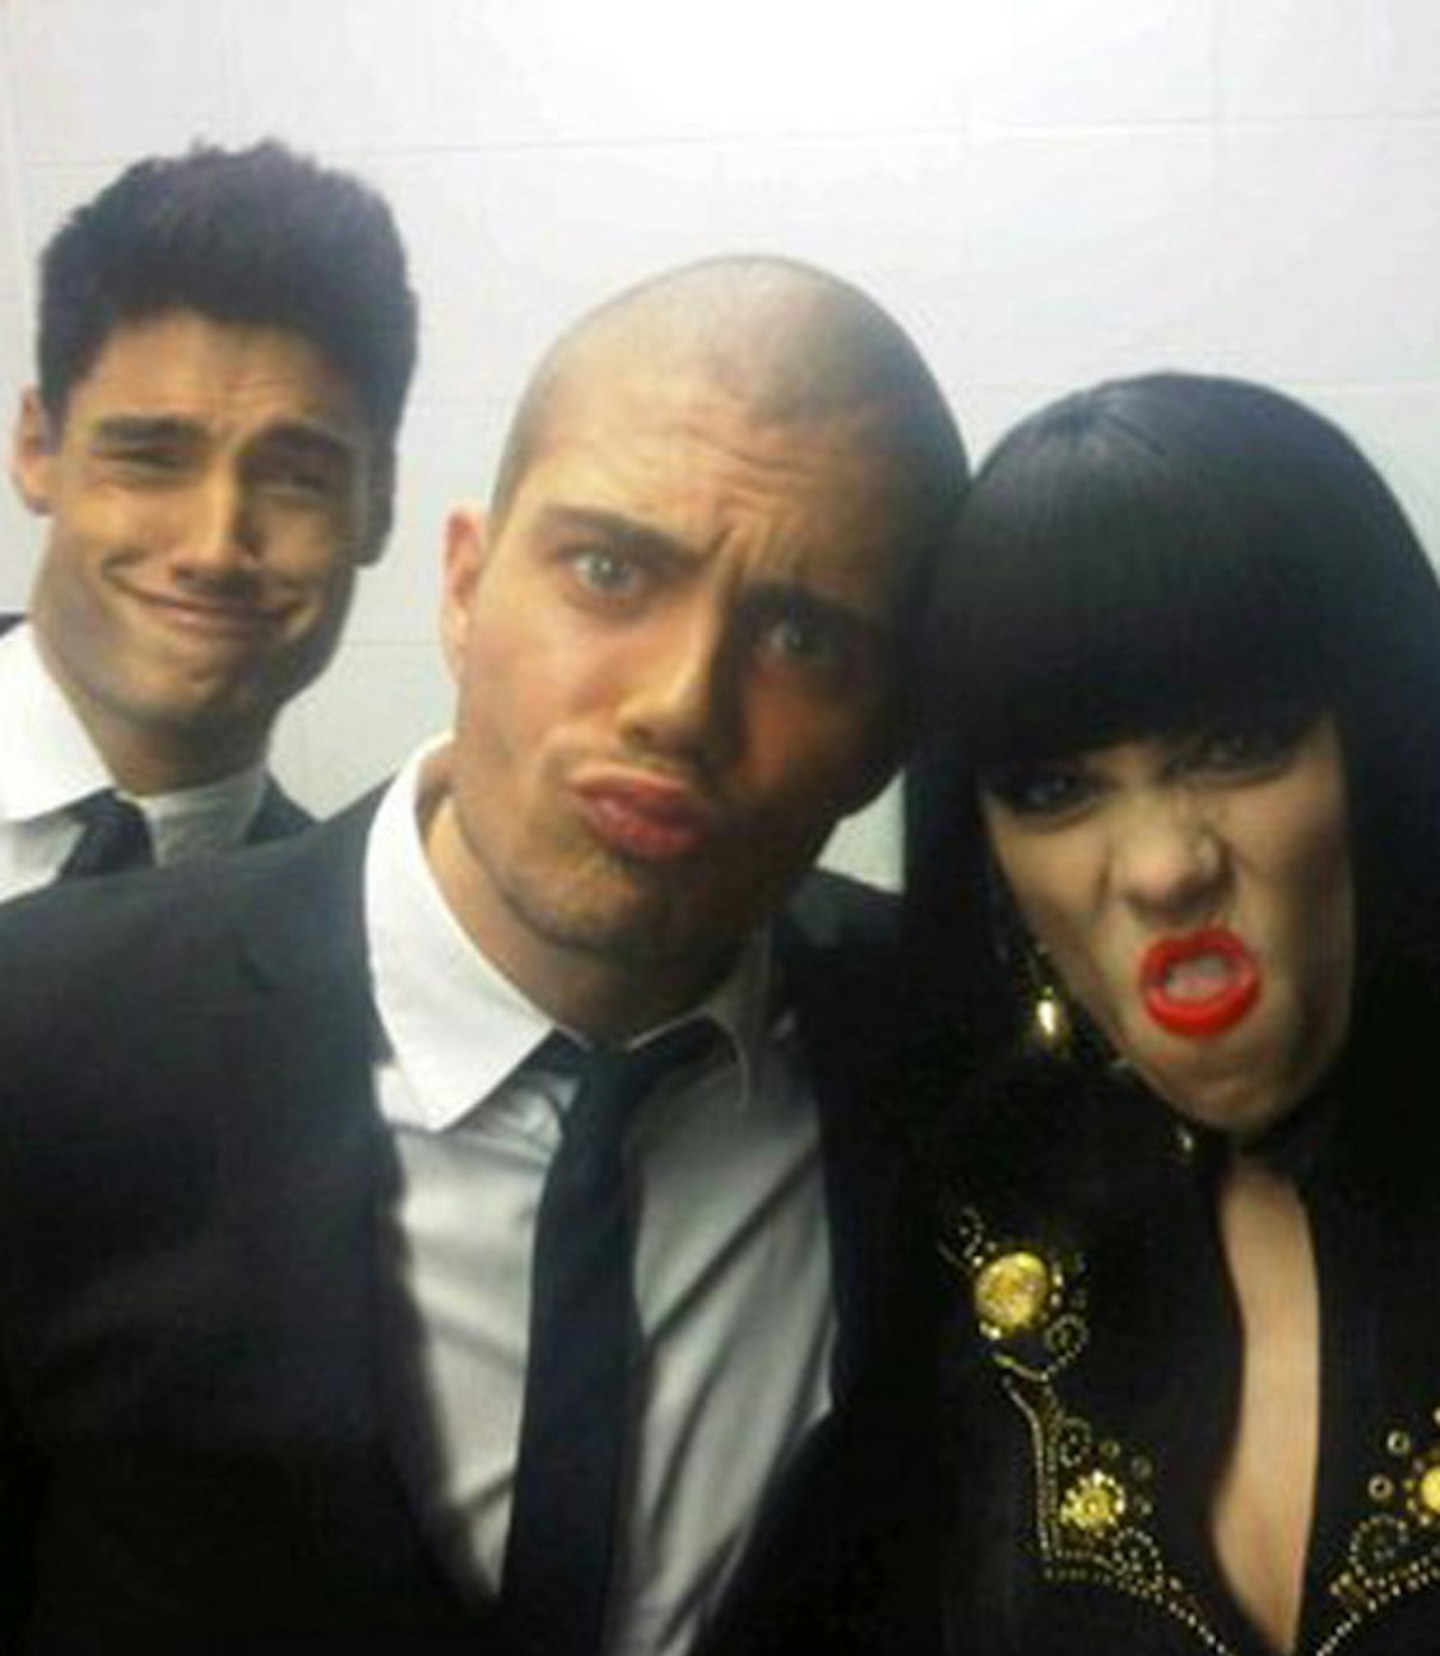 Jessie J, Siva and Max from The Wanted